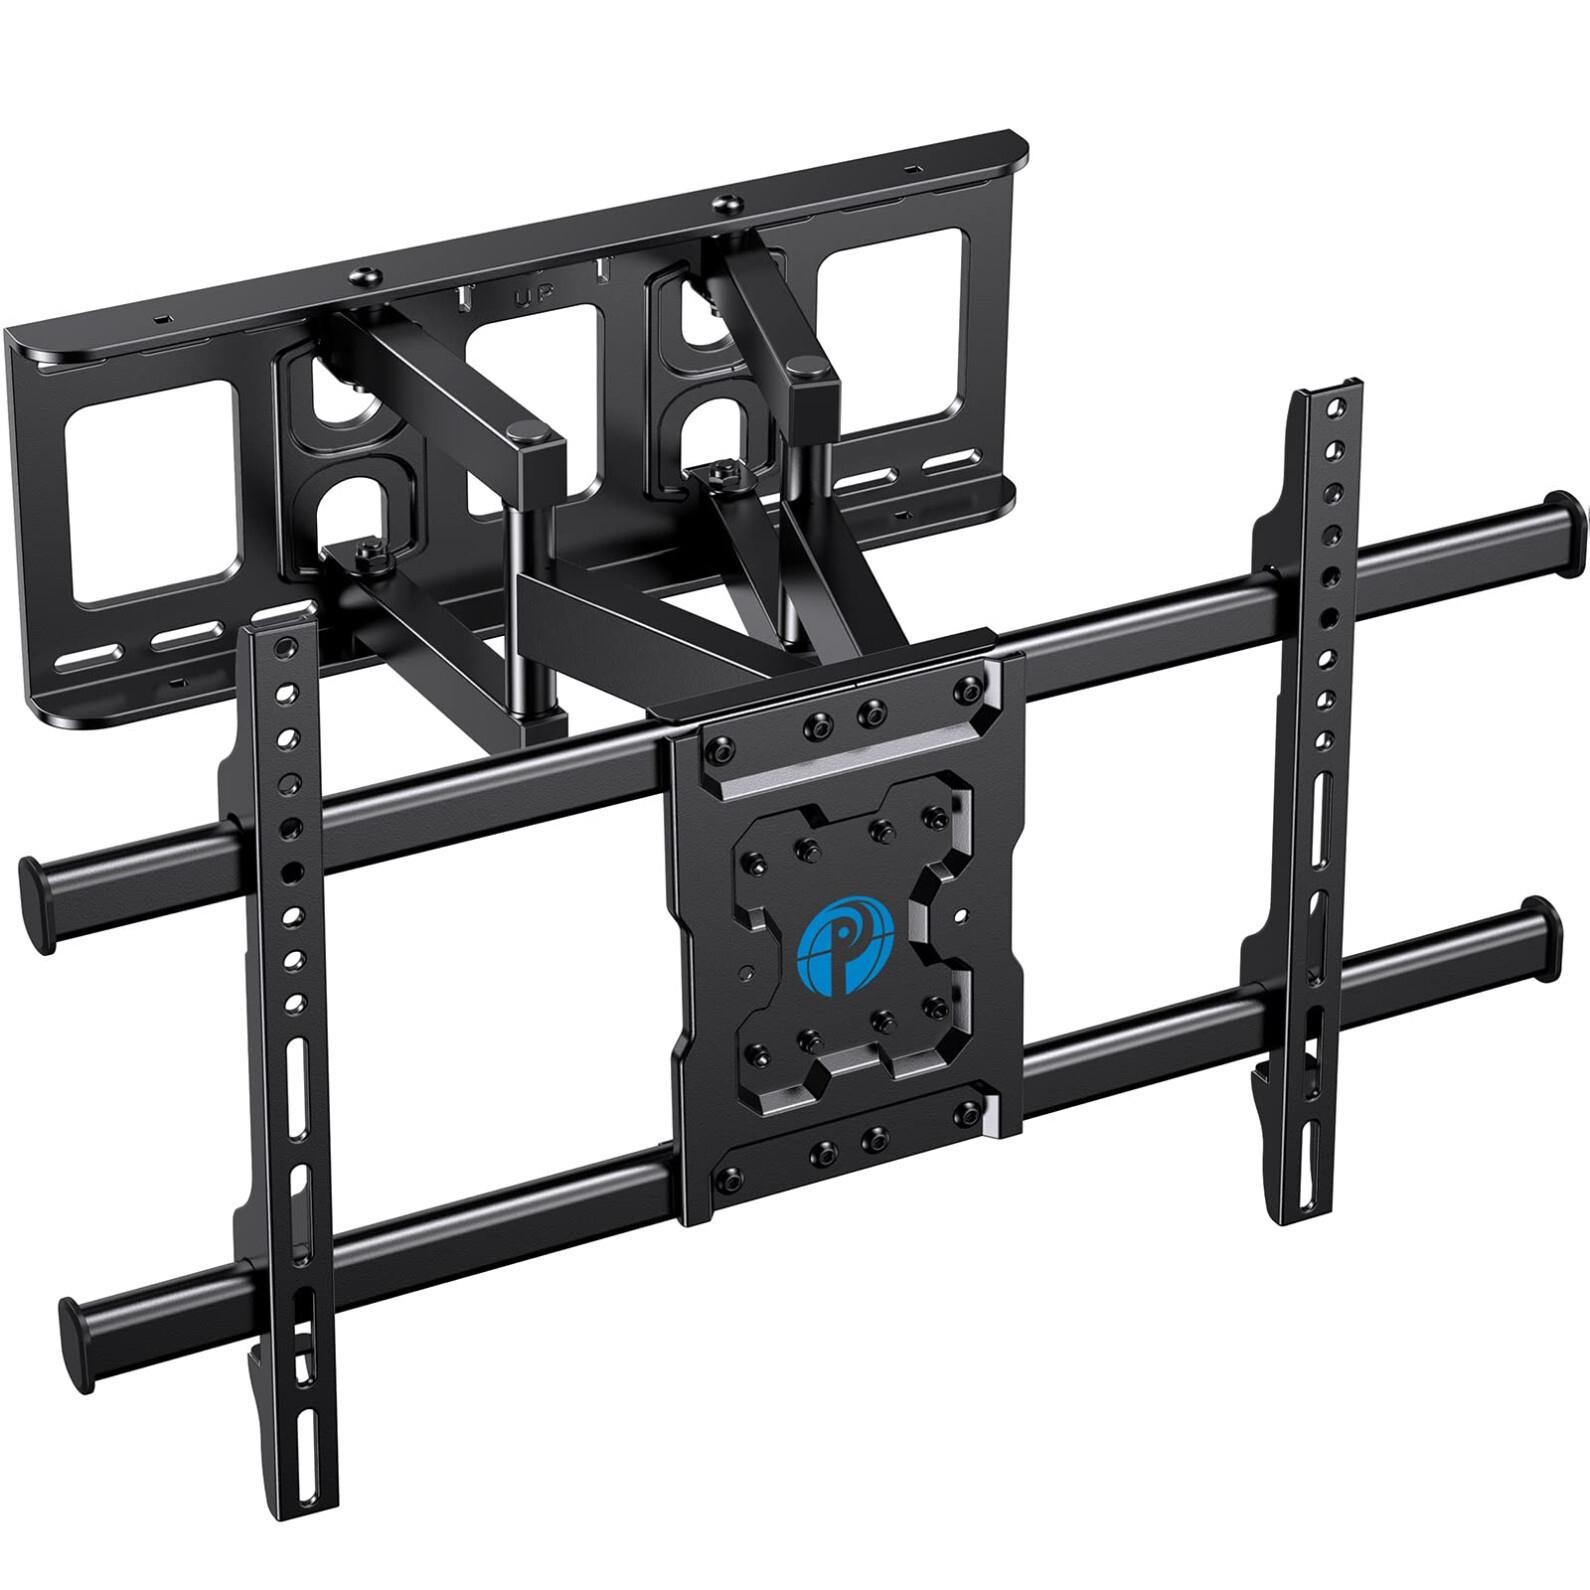 Pipishell Full Motion TV Wall Mount for Most 37-75